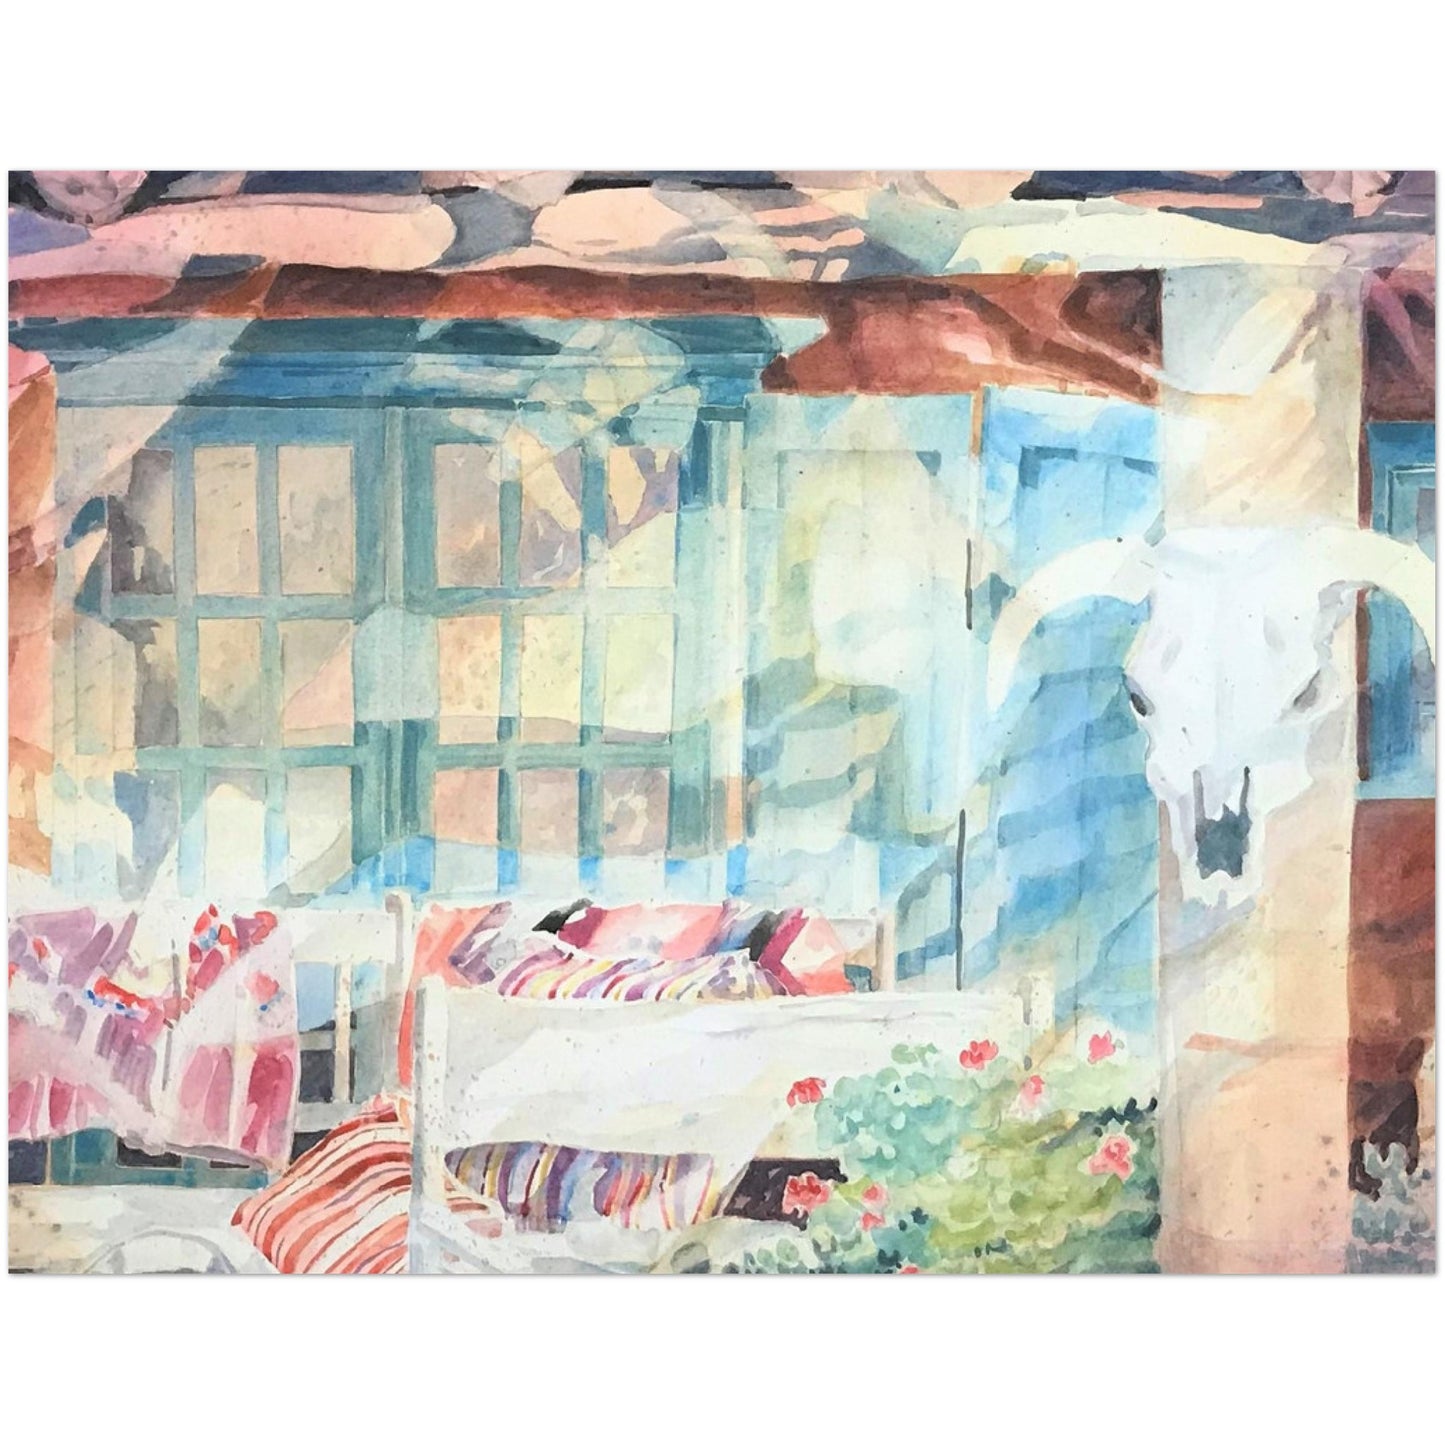 Pack of 10 postcards "Southwestern Home" Watercolor (2-sided, No envelopes, US & CA) by Barbara Cleary Designs